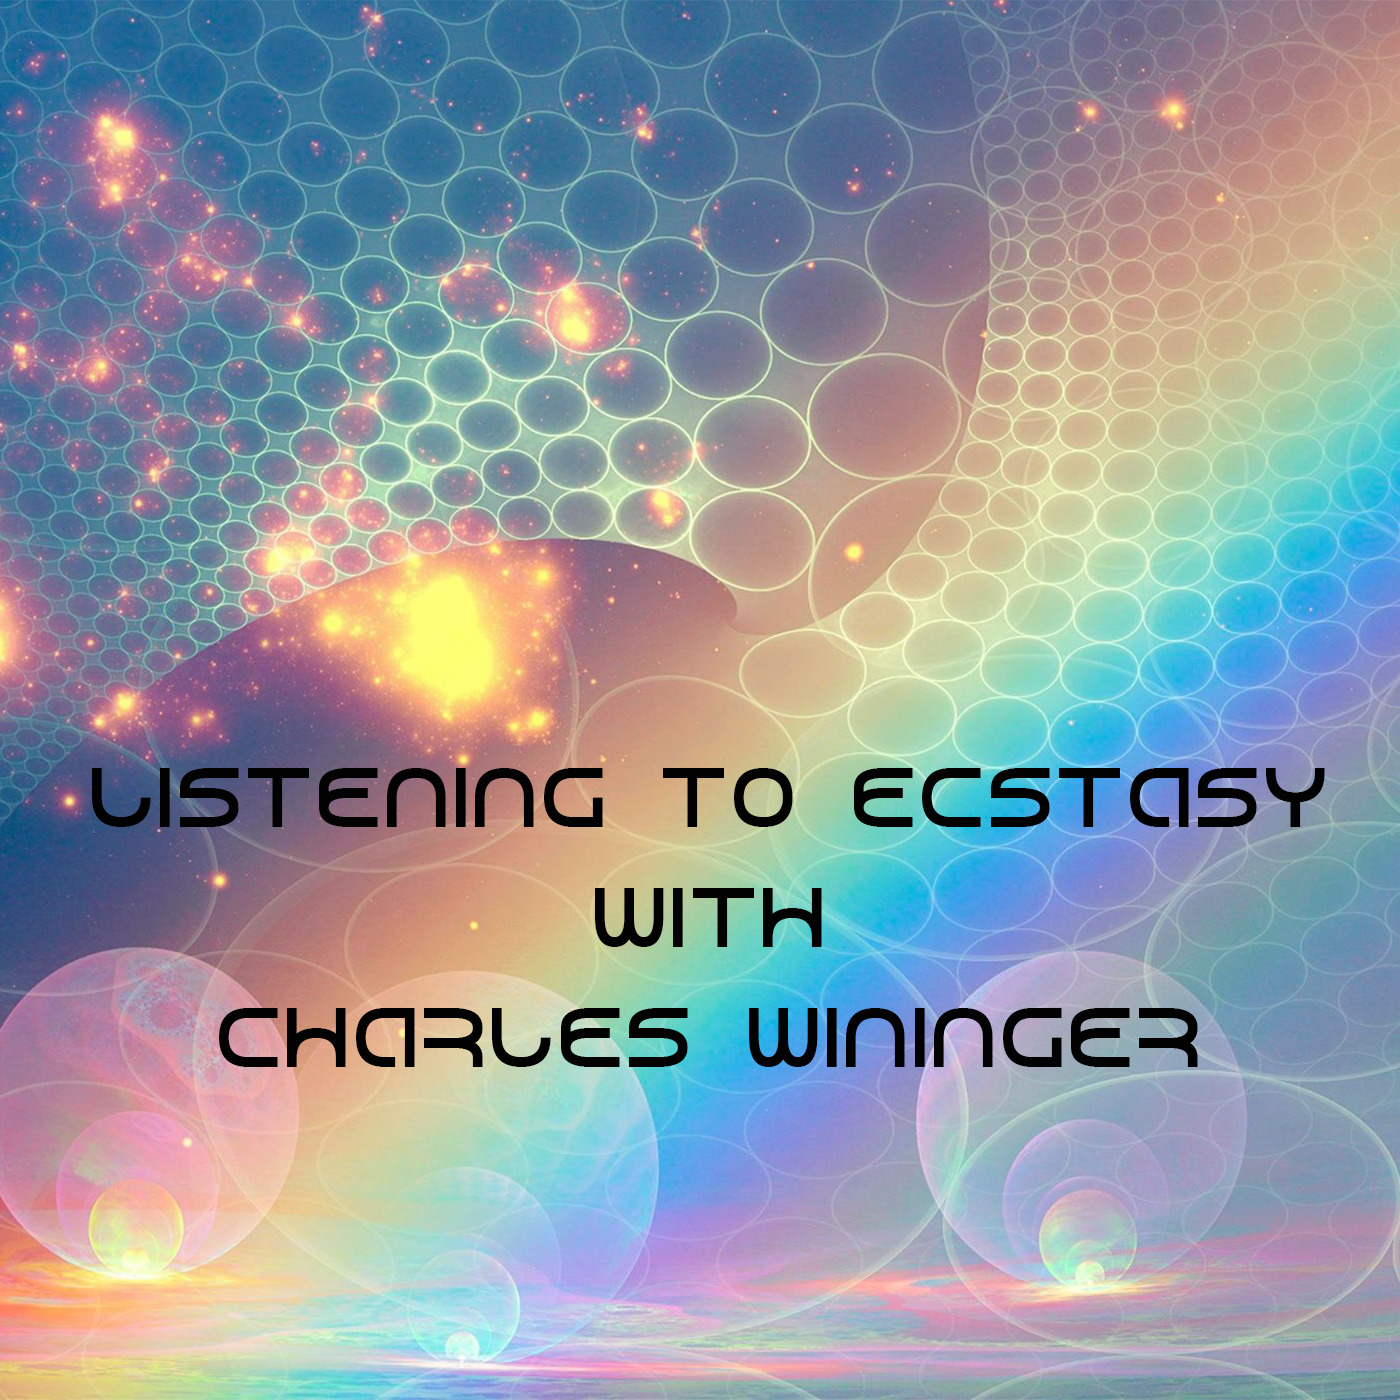 Episode 170: Listening to Ecstasy with Charles Wininger